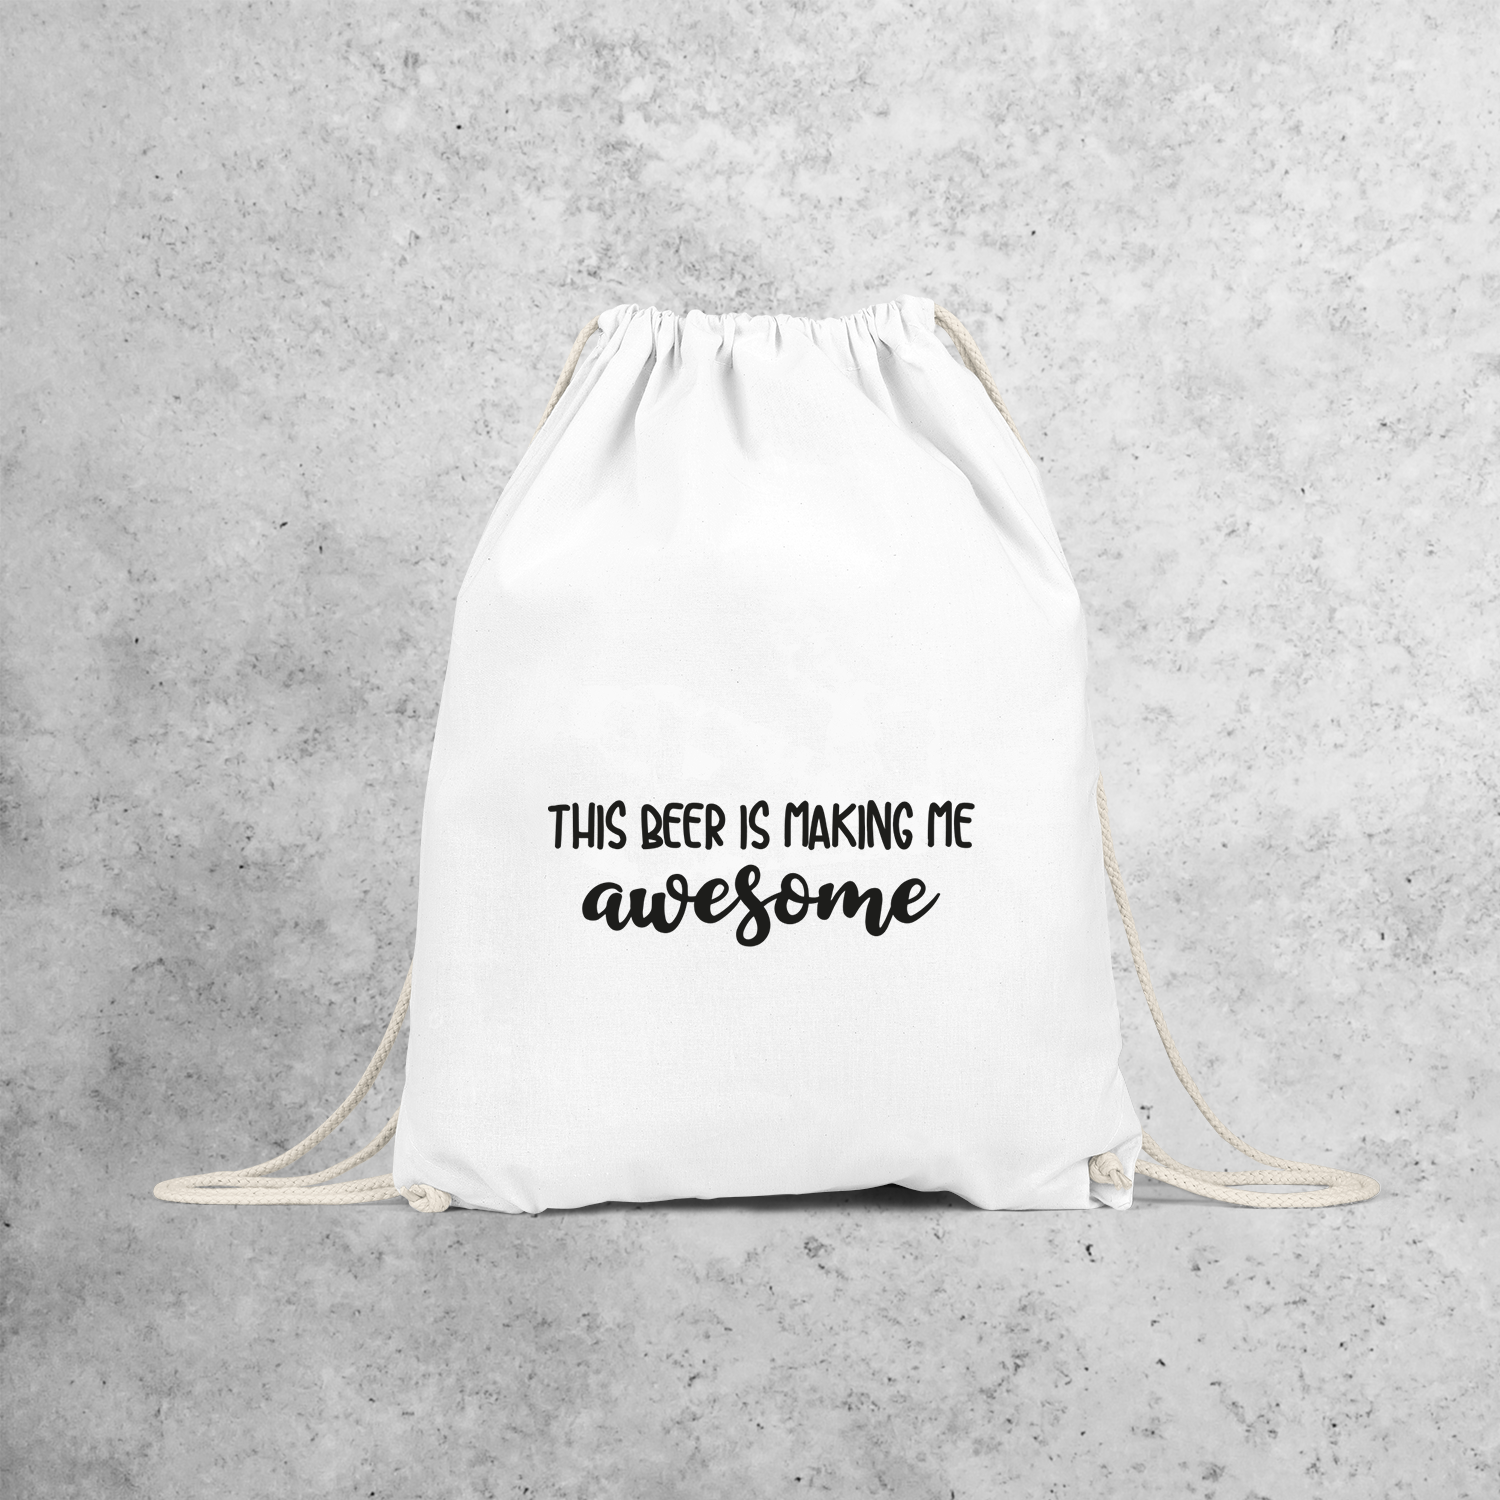 'This beer is making me awesome' backpack